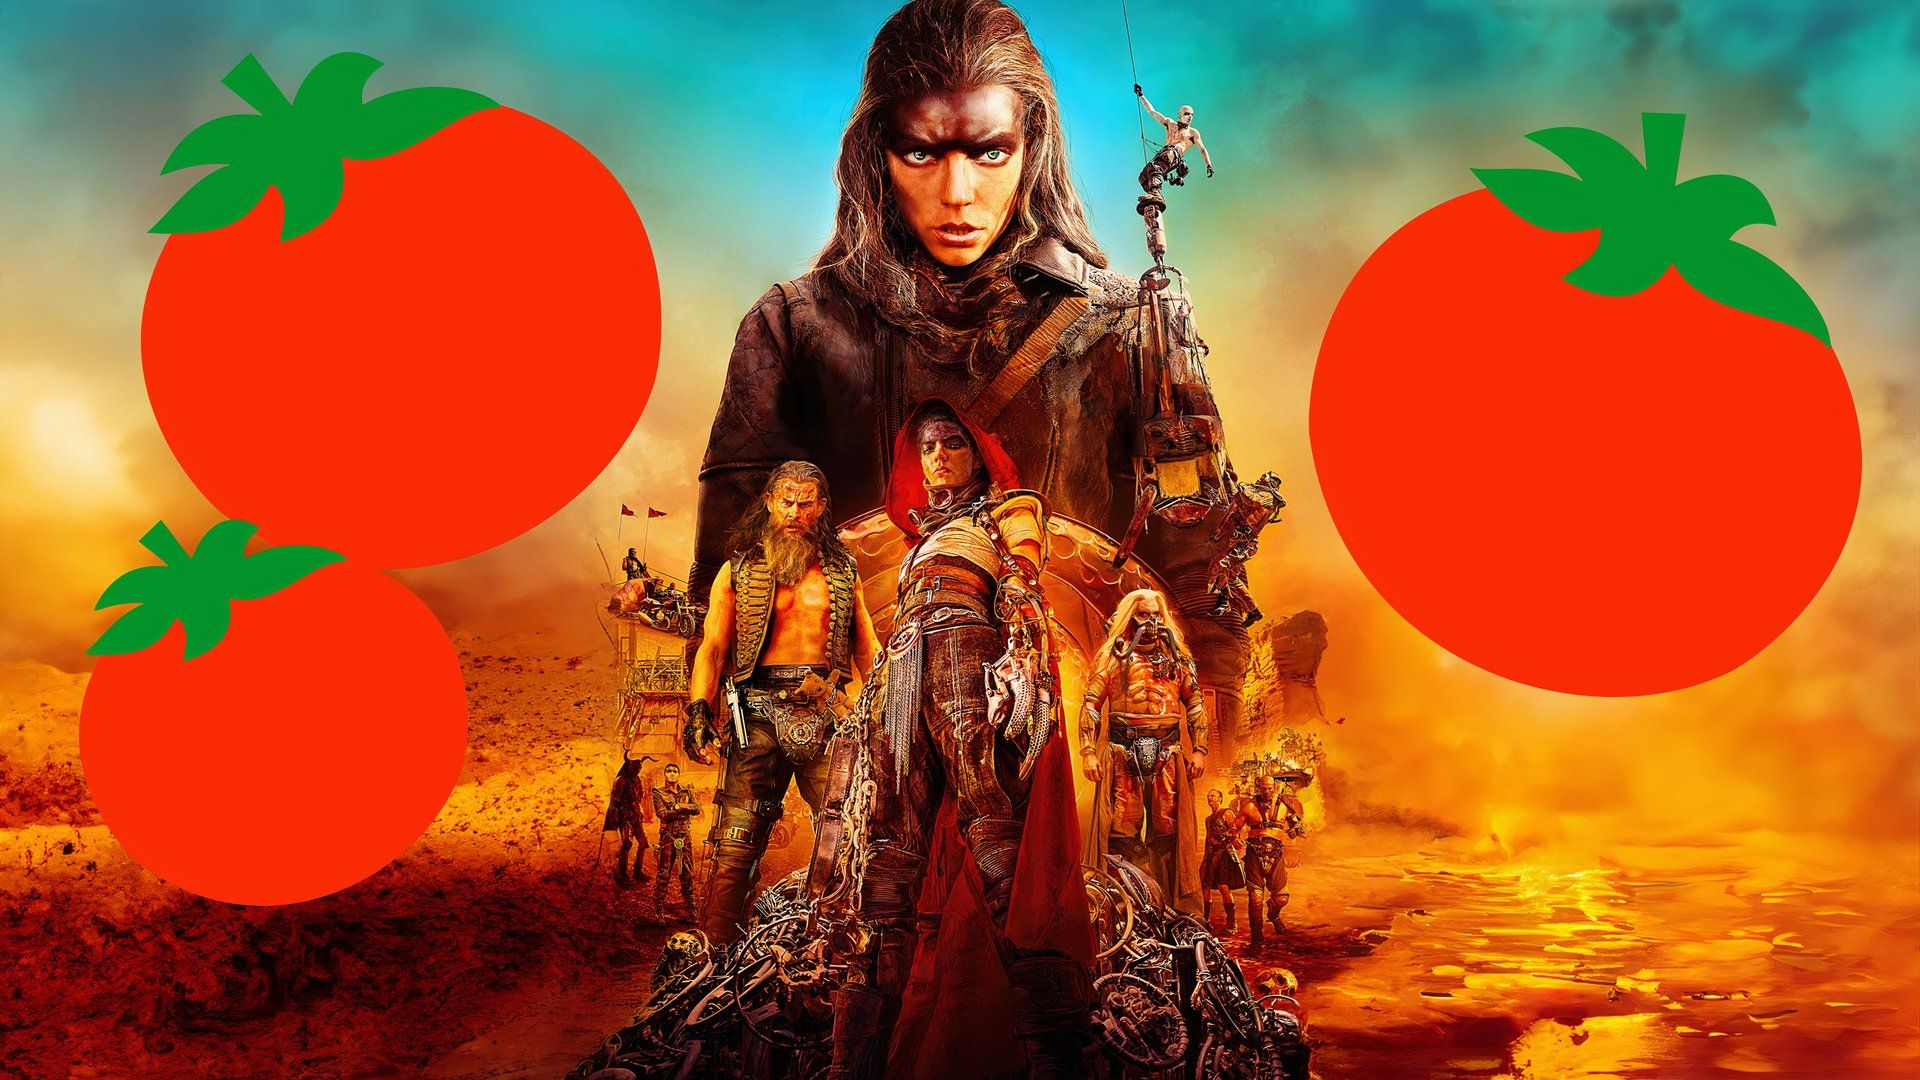 The cast of Furiosa surrounded by tomatoes.